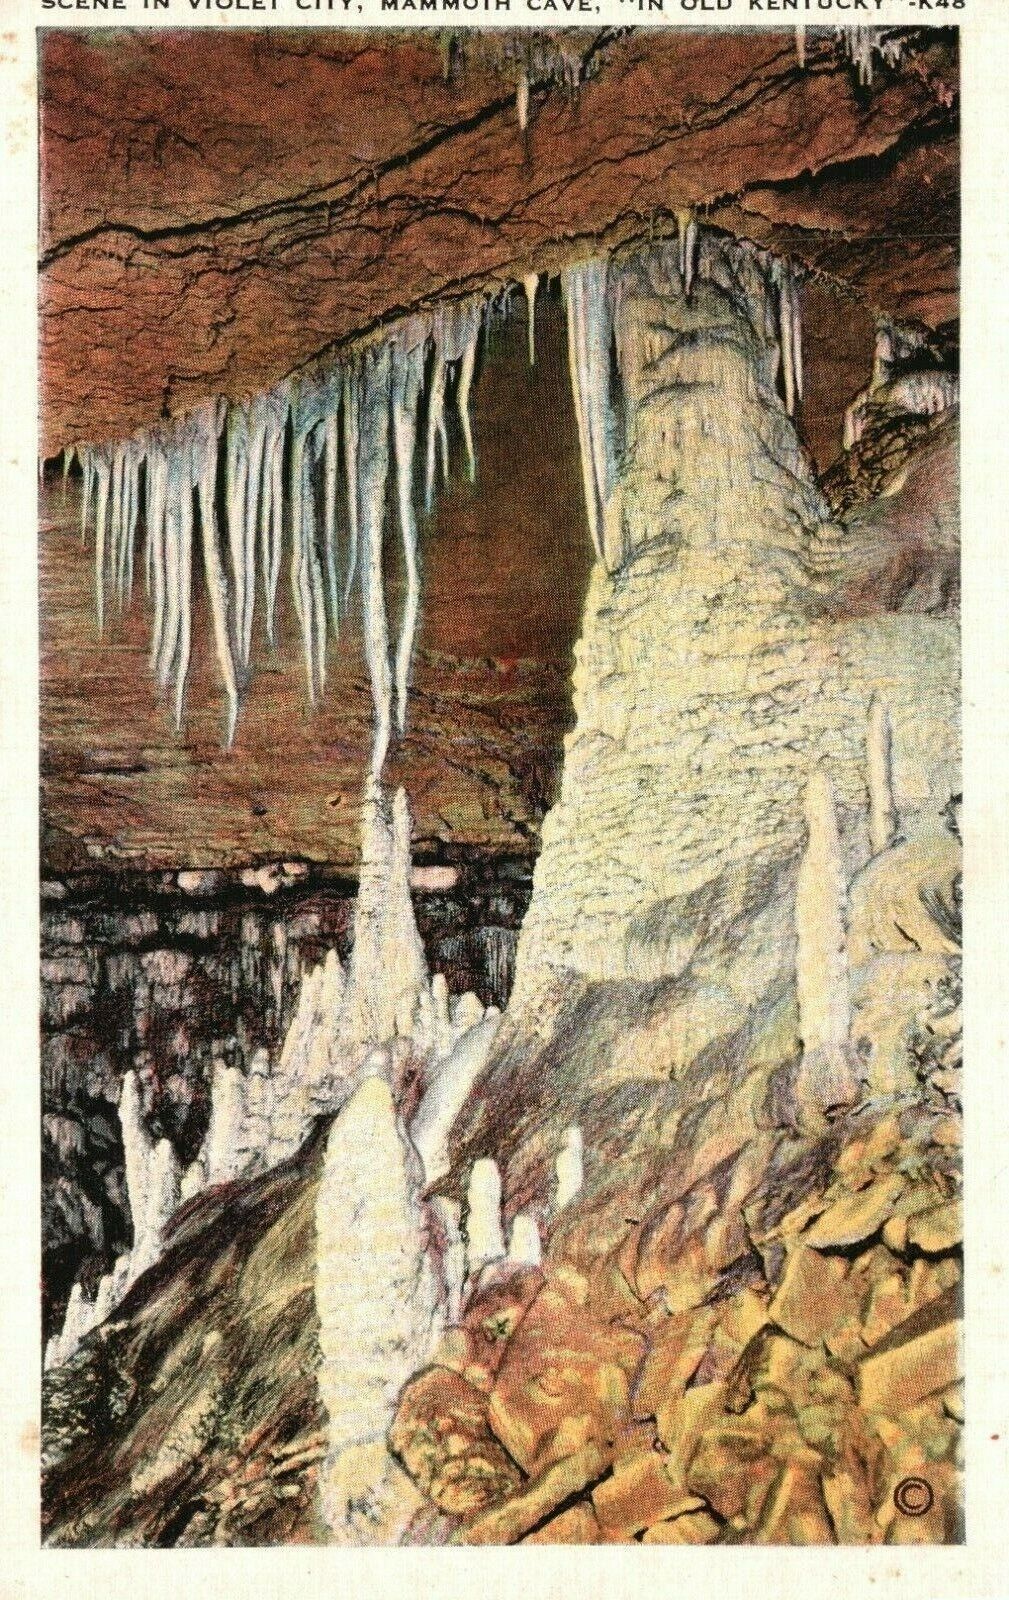 Vintage Postcard Scene in Violet City Mammoth Cave in Old Kentucky